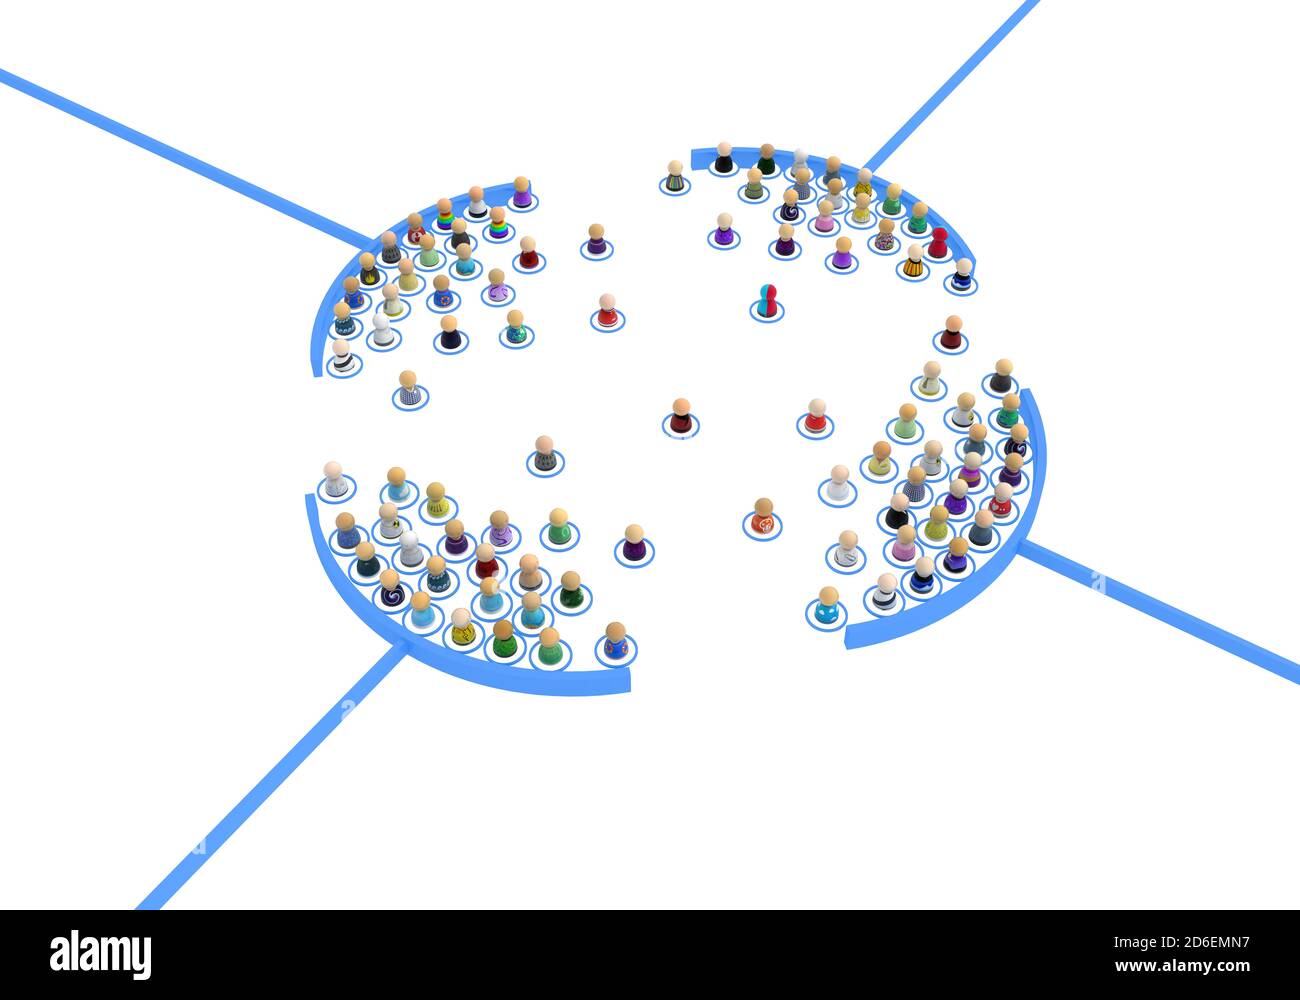 Crowd of small symbolic 3d figures linked, complex layered system, circle forming, over white, horizontal, isolated Stock Photo